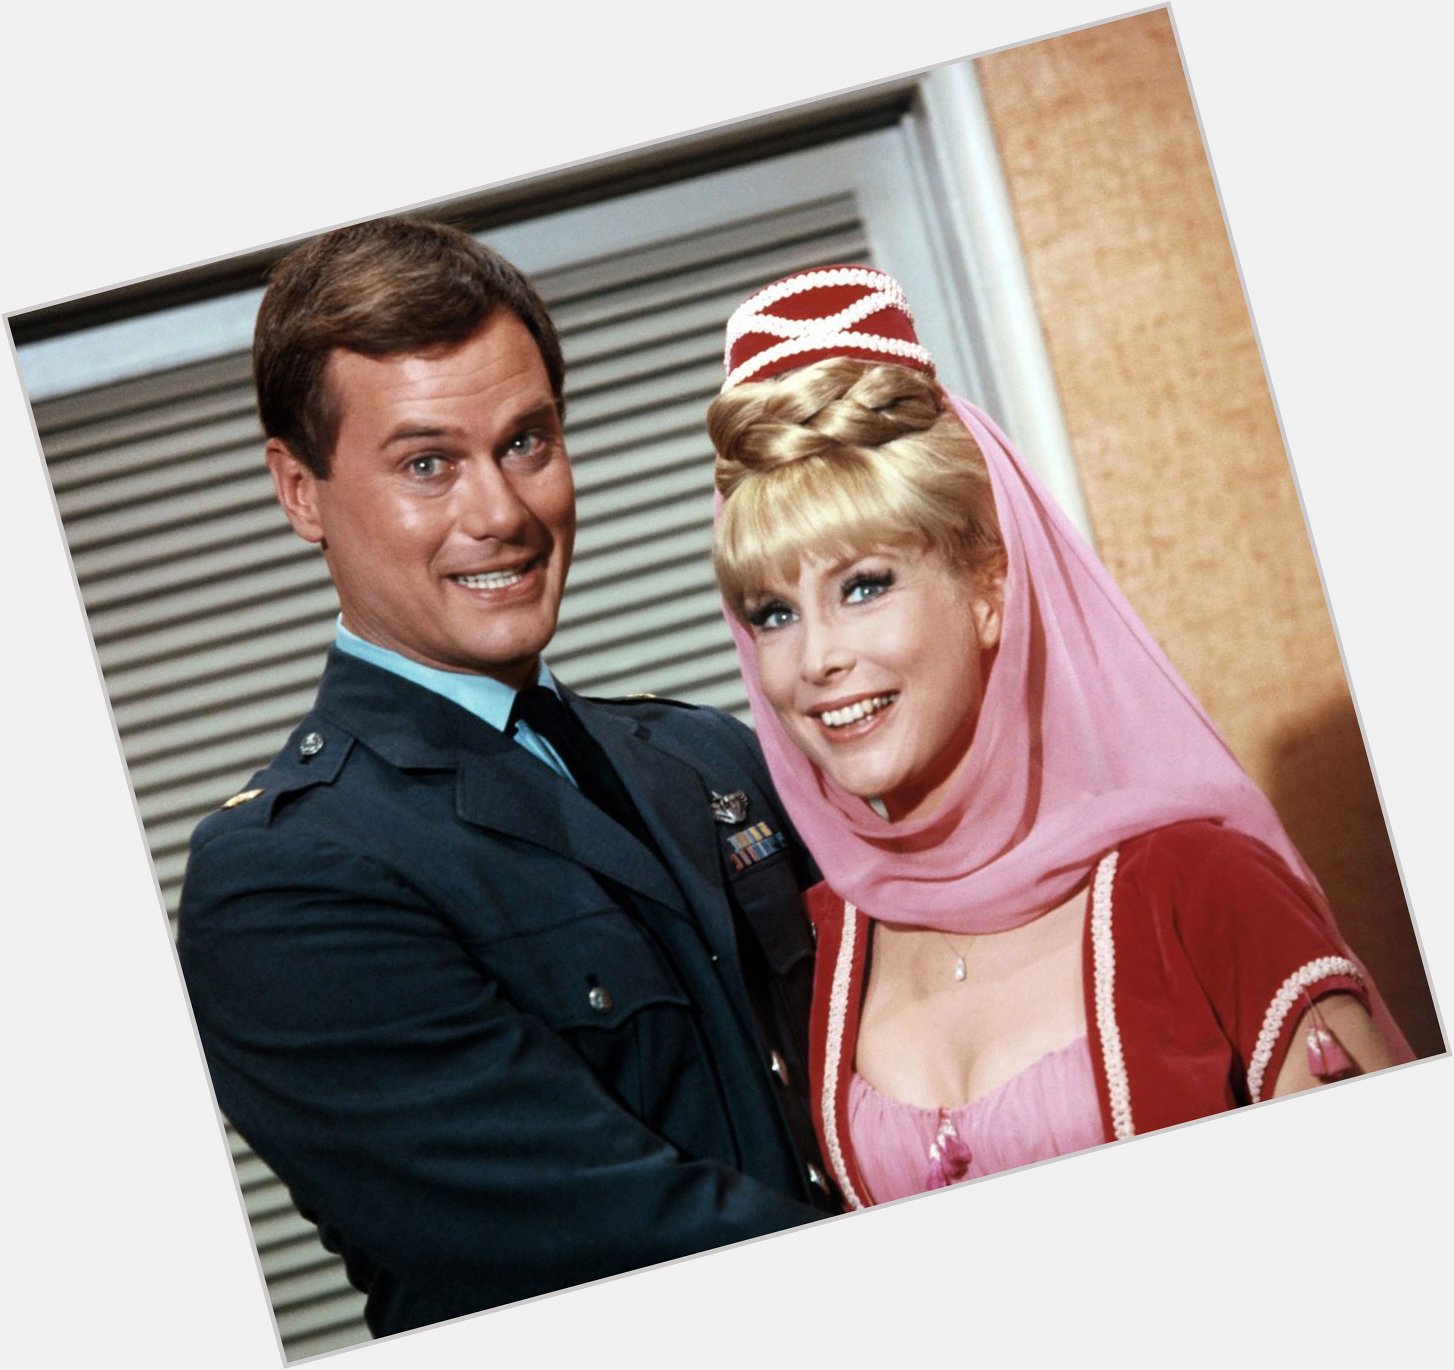 Happy 90th Birthday to Barbara Eden, who famously played Jeannie in \I Dream Of Jeannie\! 